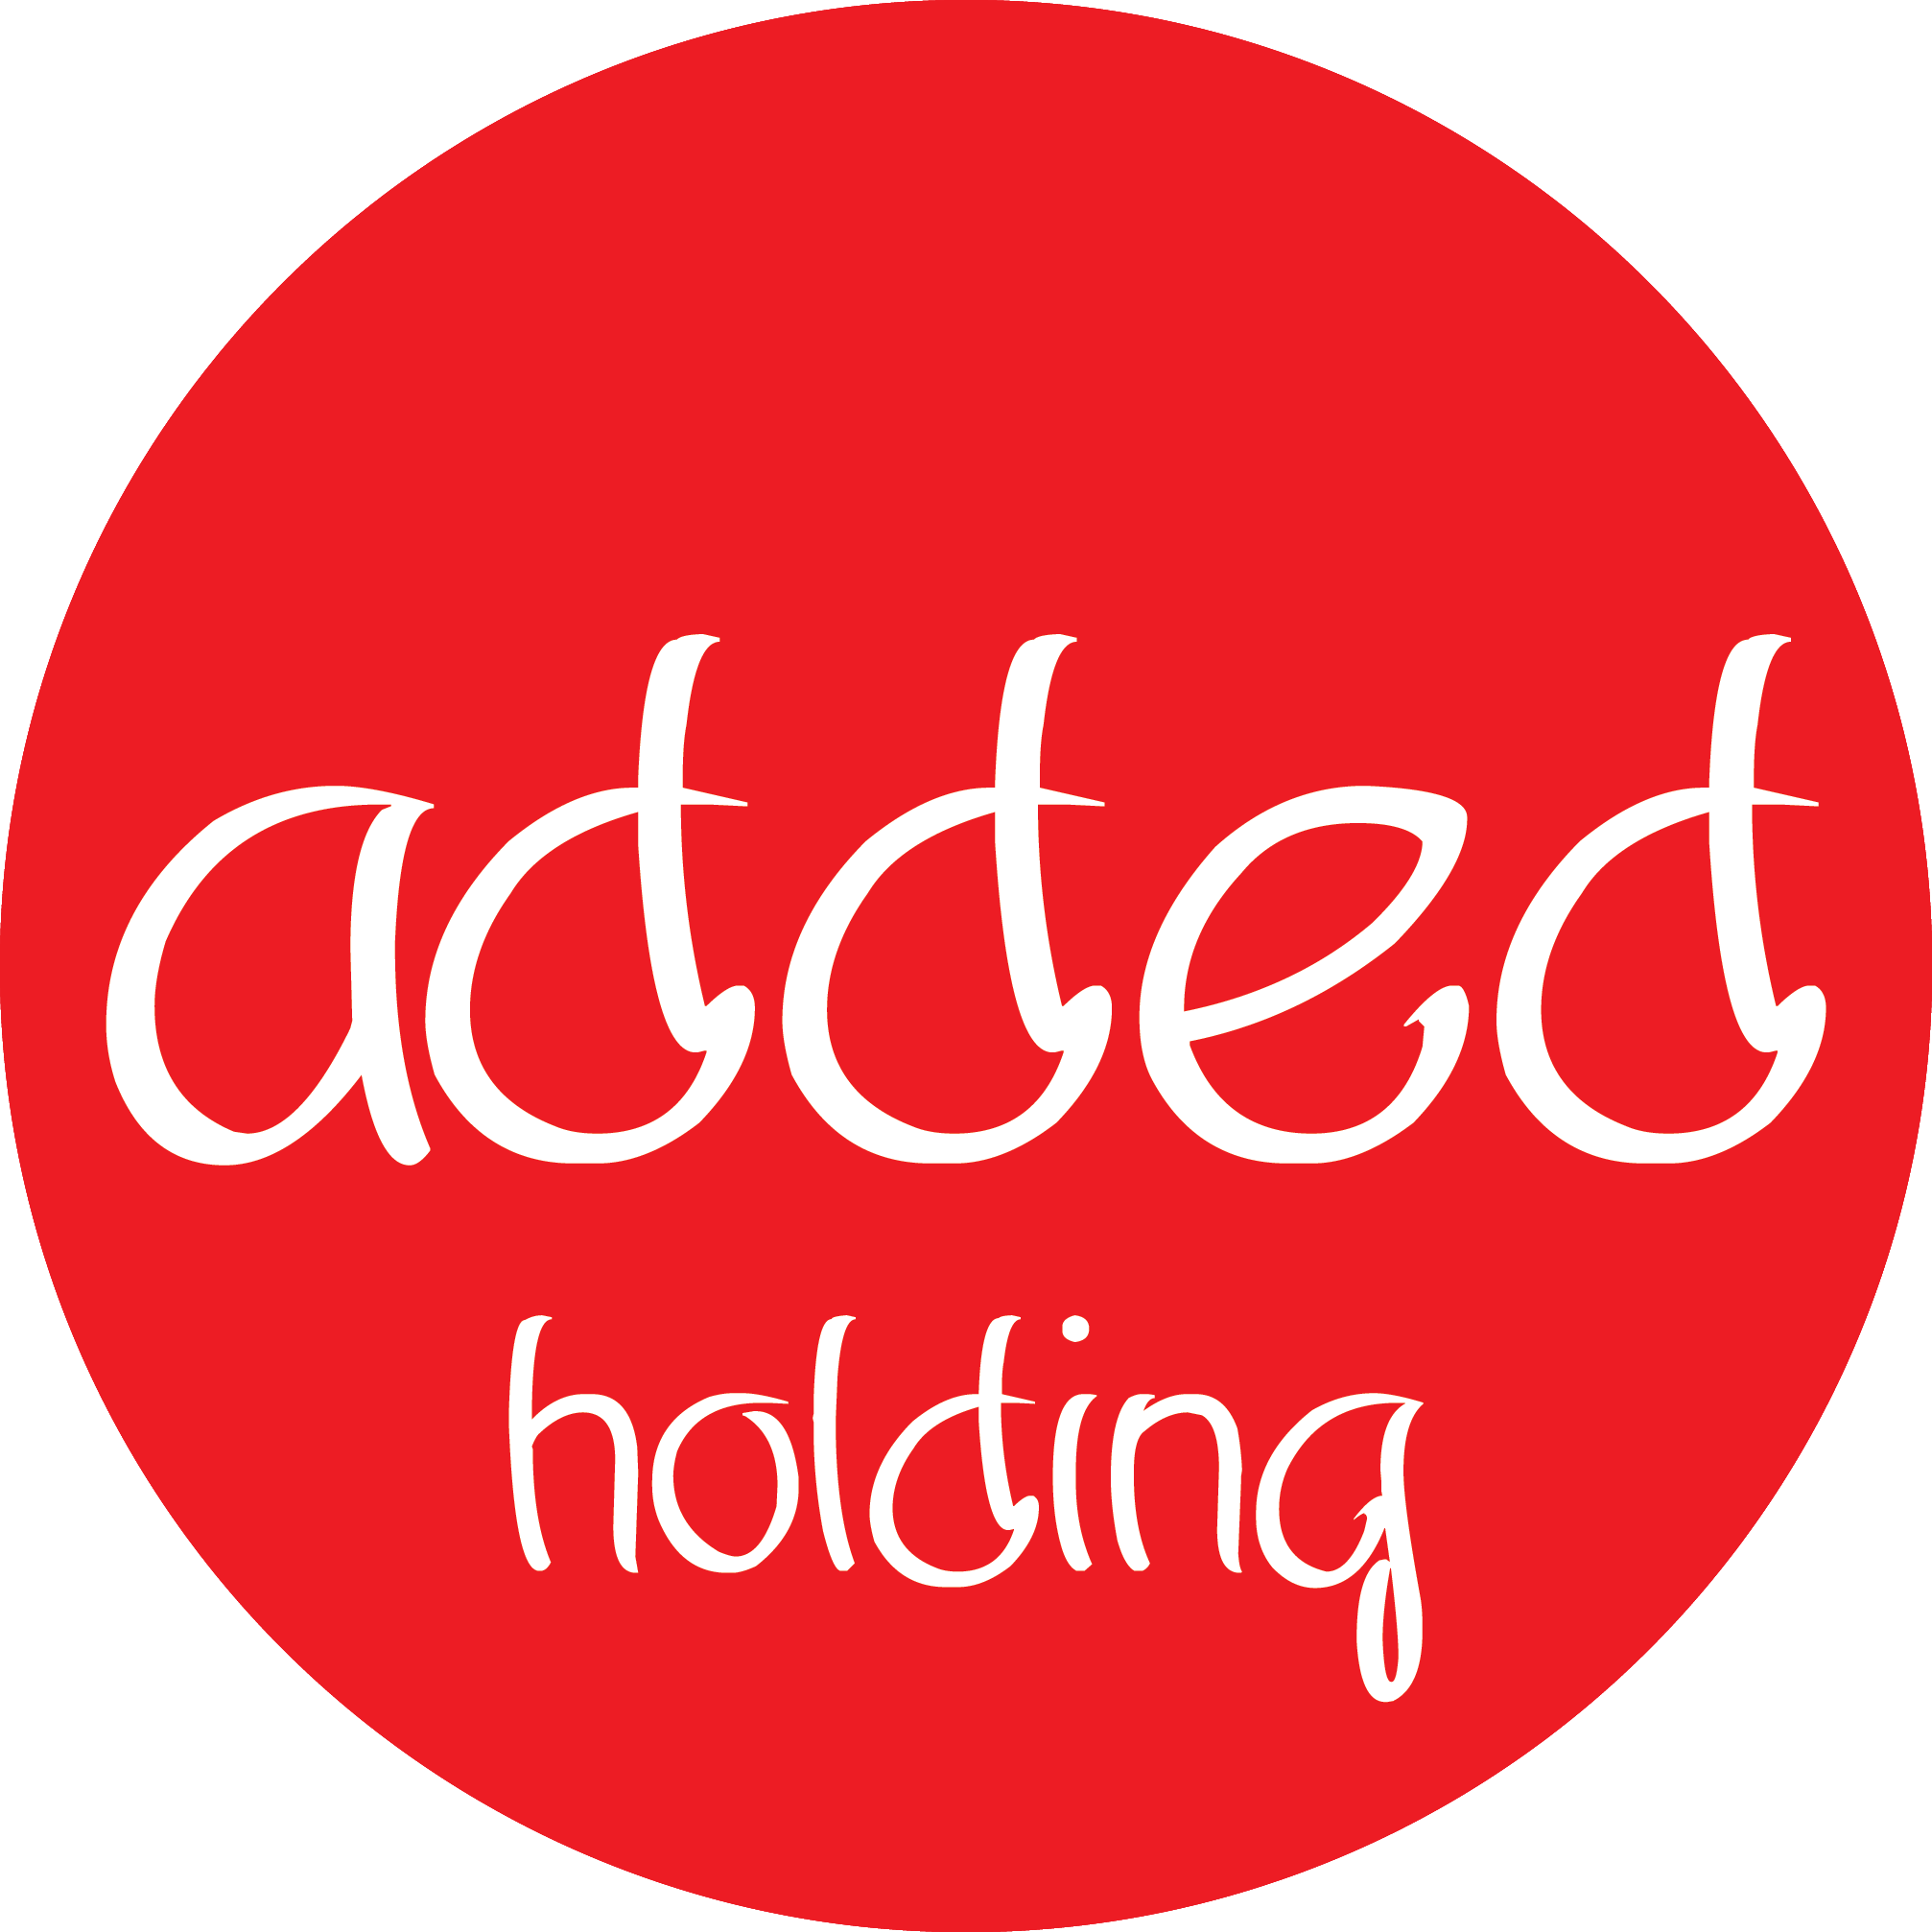 Added Holding